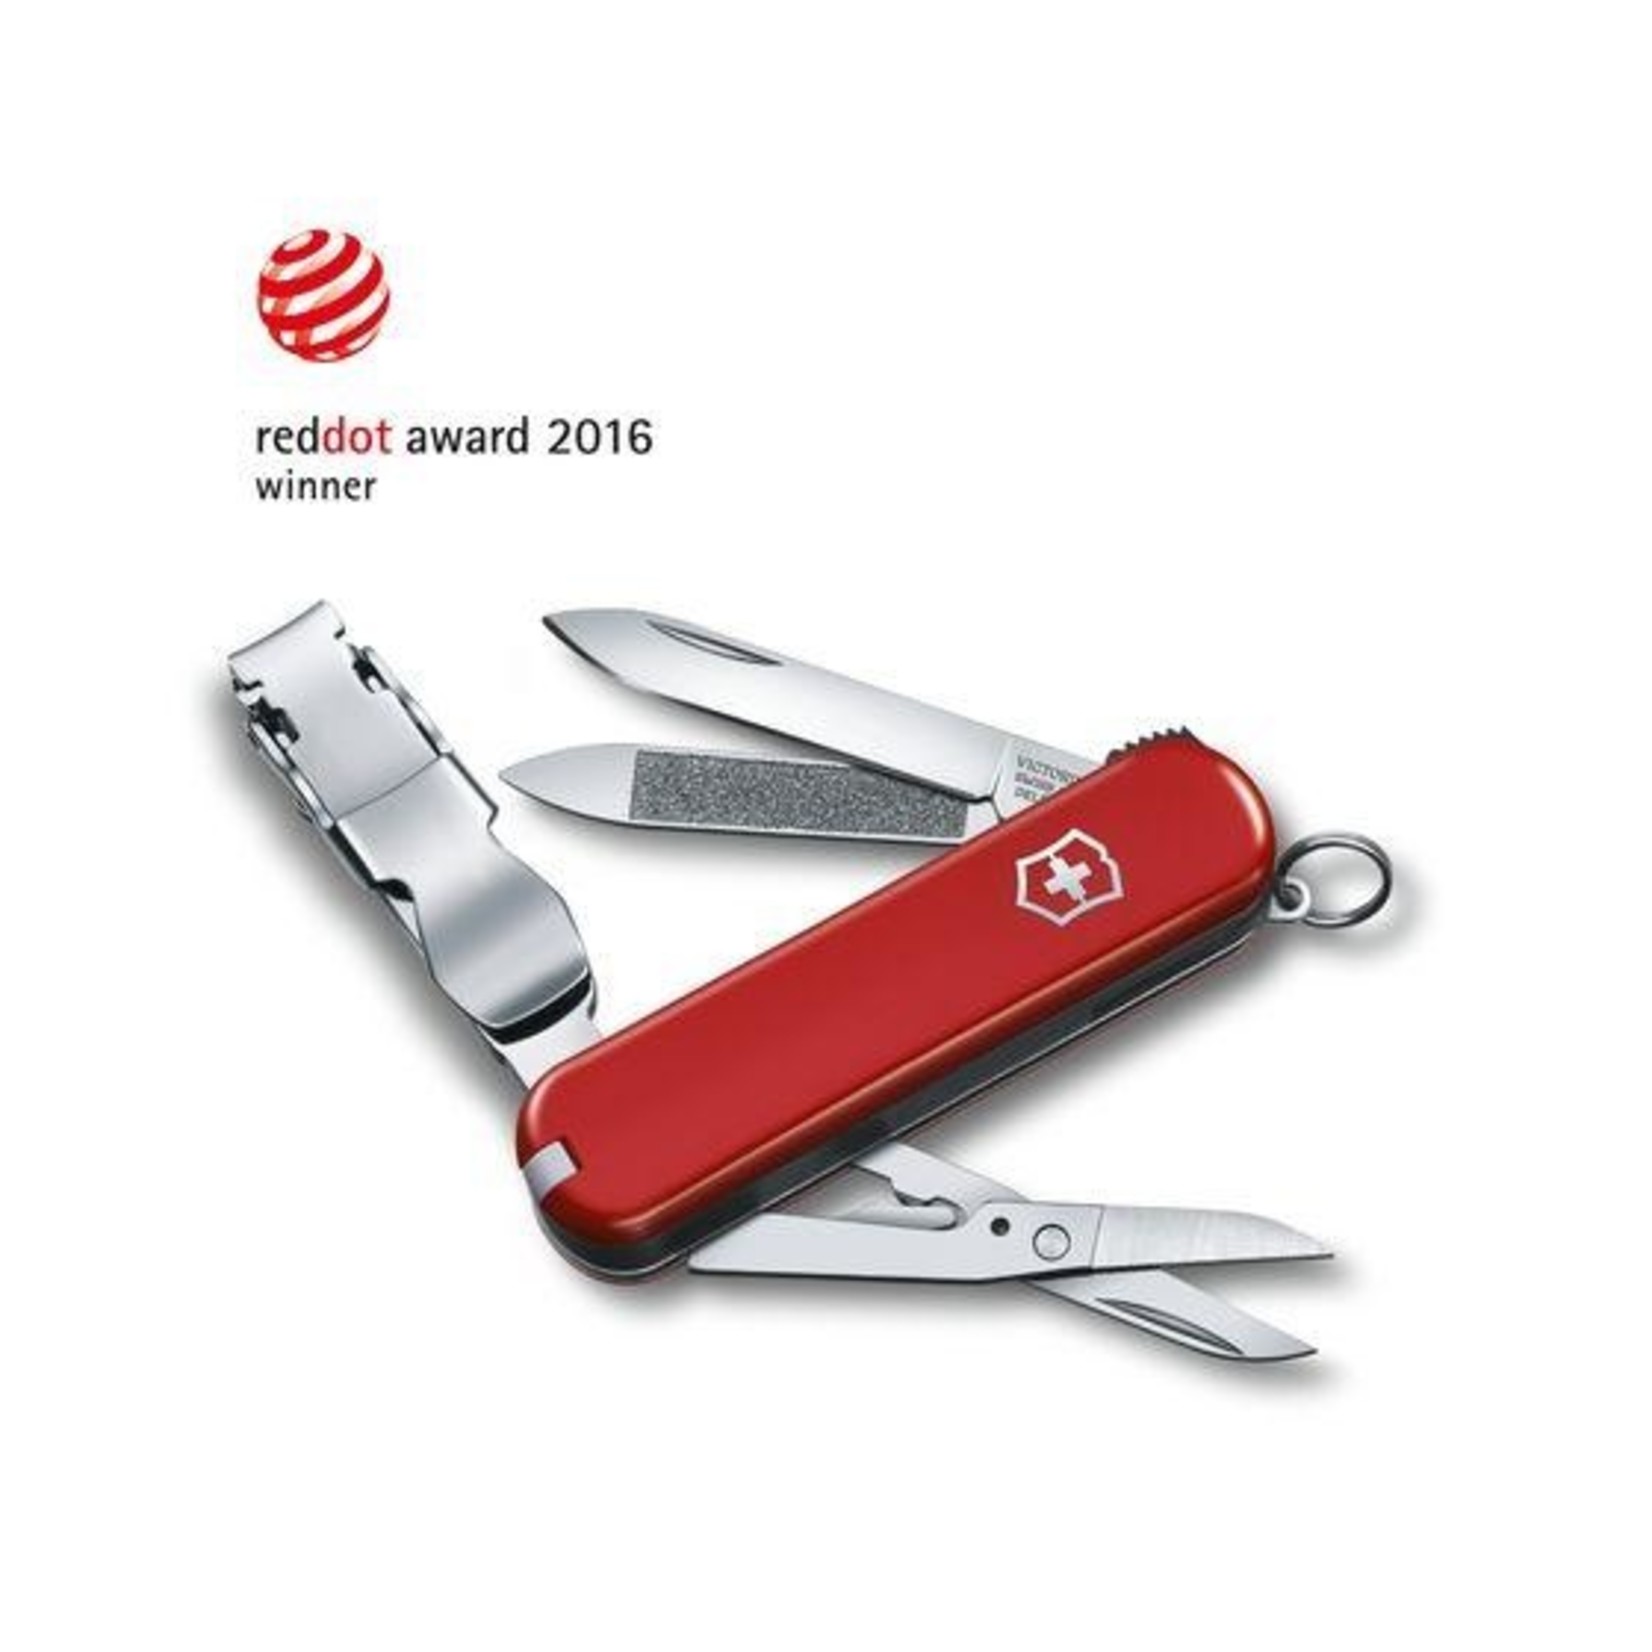 VICTORINOX 0.6463-X5 - CANIF COUPE ONGLE 580 65MM ROUGE VICTORINOX